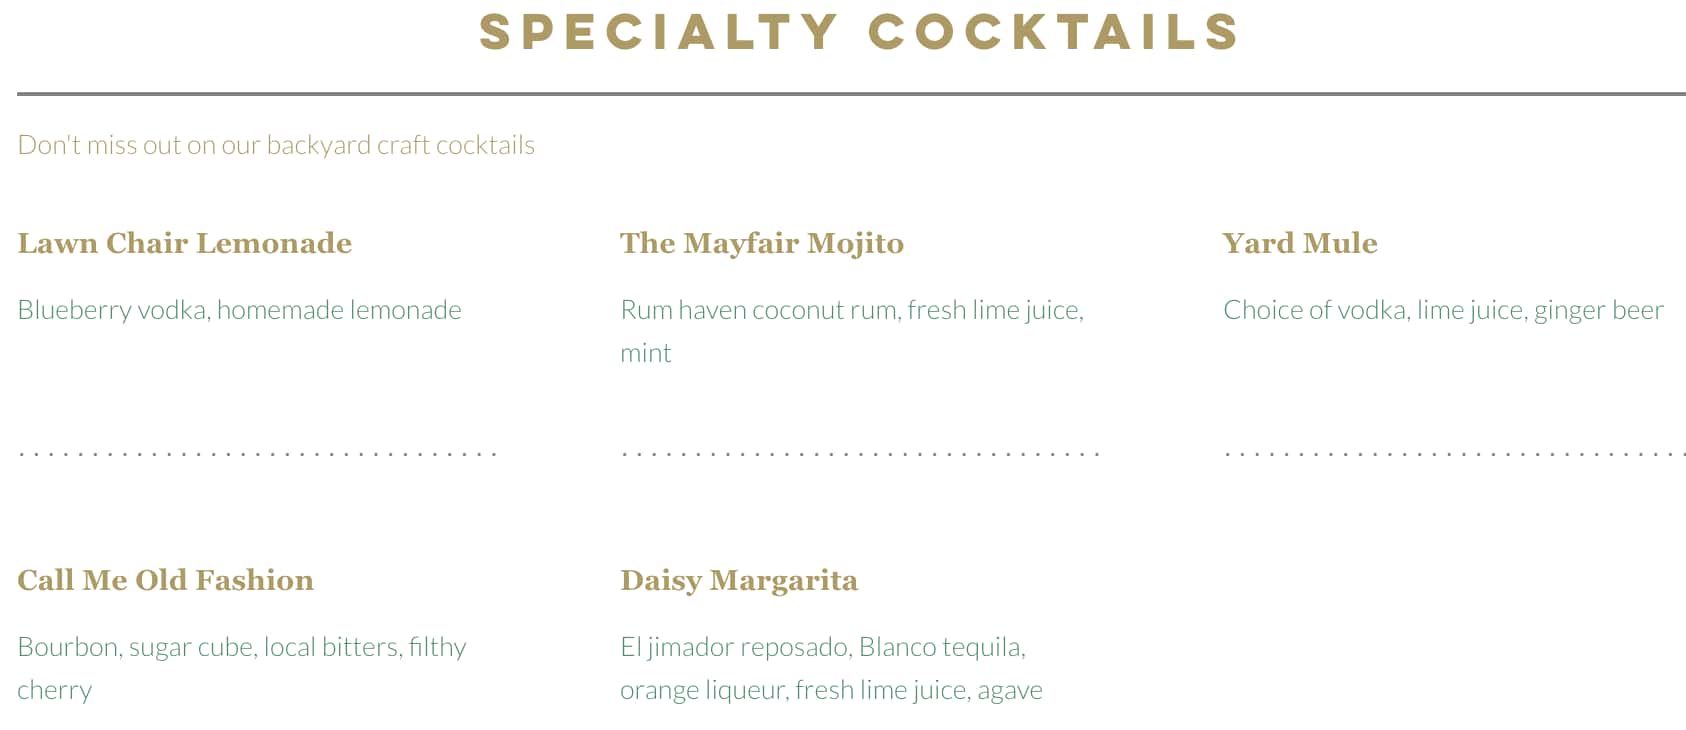 The Yardery Specialty Cocktails Menu